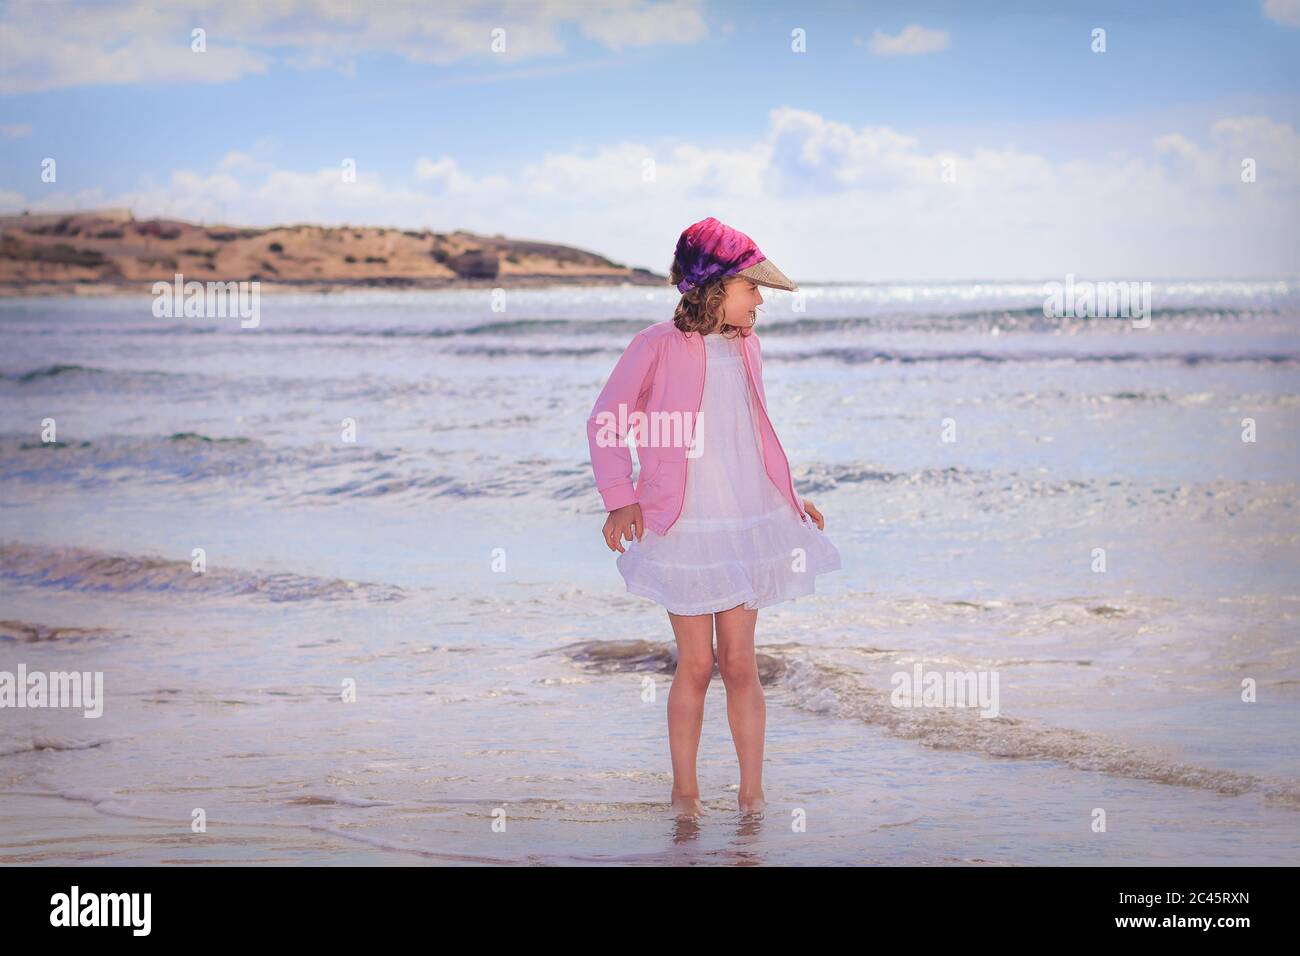 Seascape image of young girl wearing white dress standing with feet in water Stock Photo